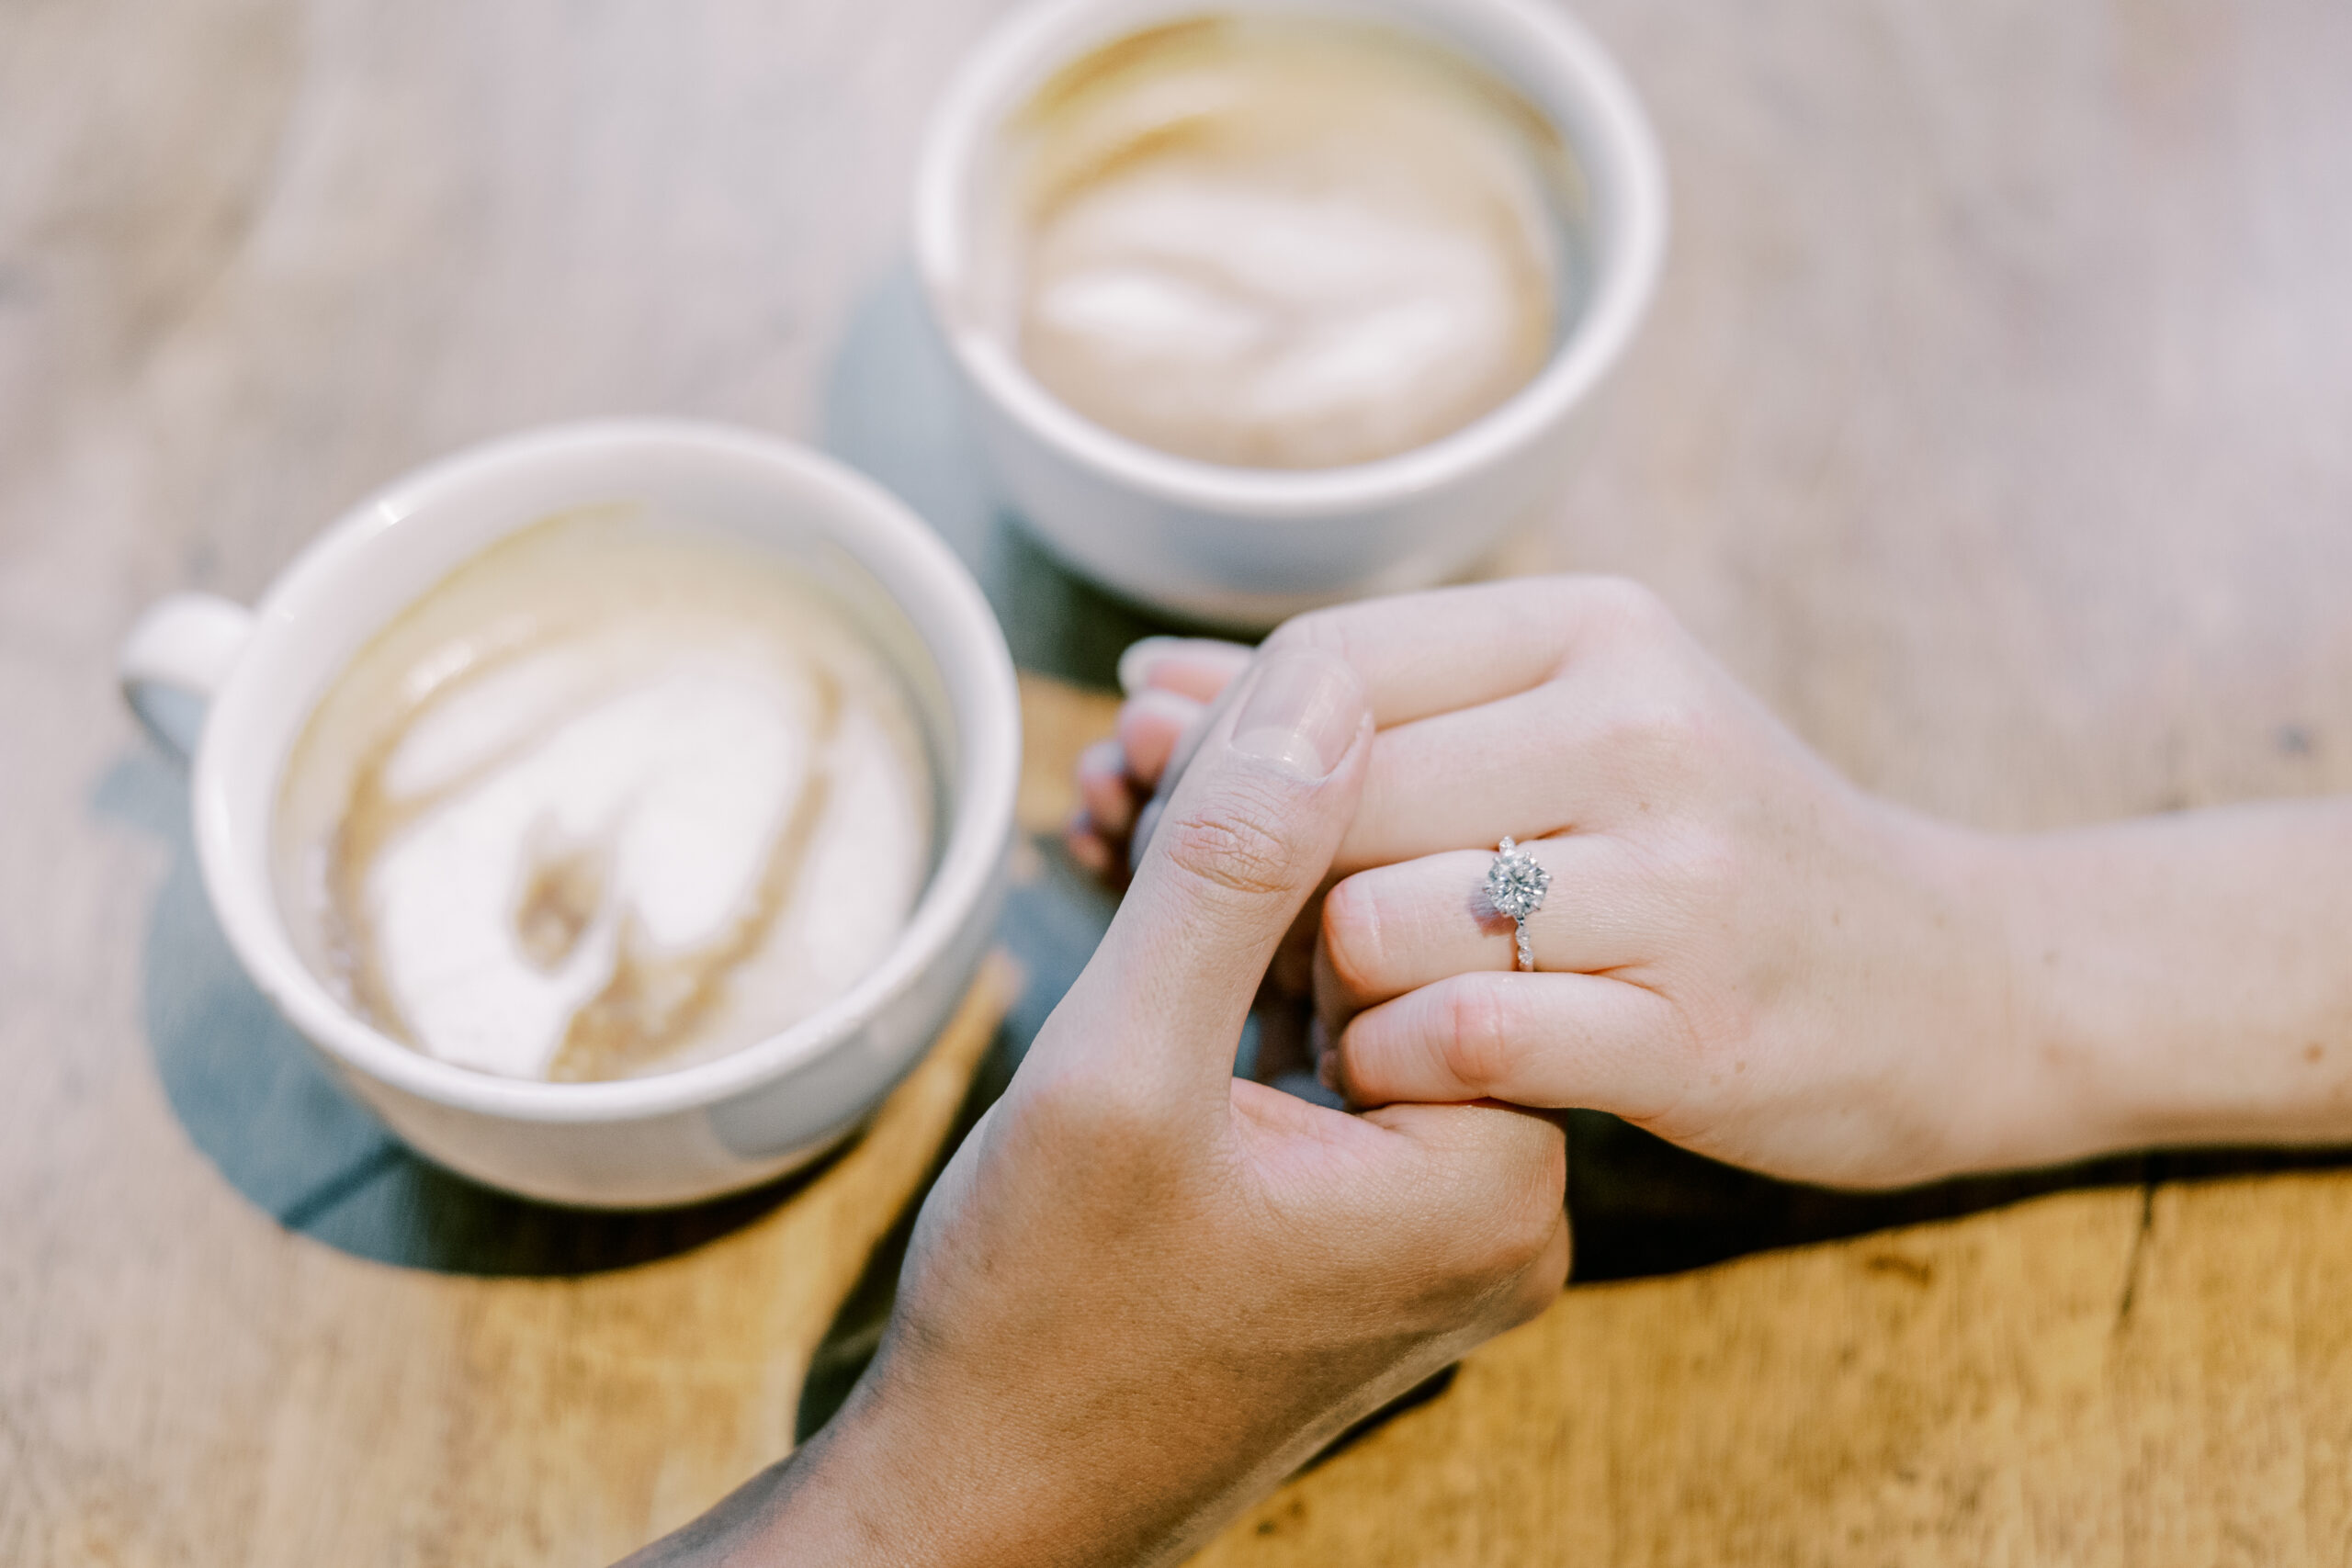 Close up image of man holding woman's hand showing off her engagement ring, two coffee mugs sit on the table beside them.